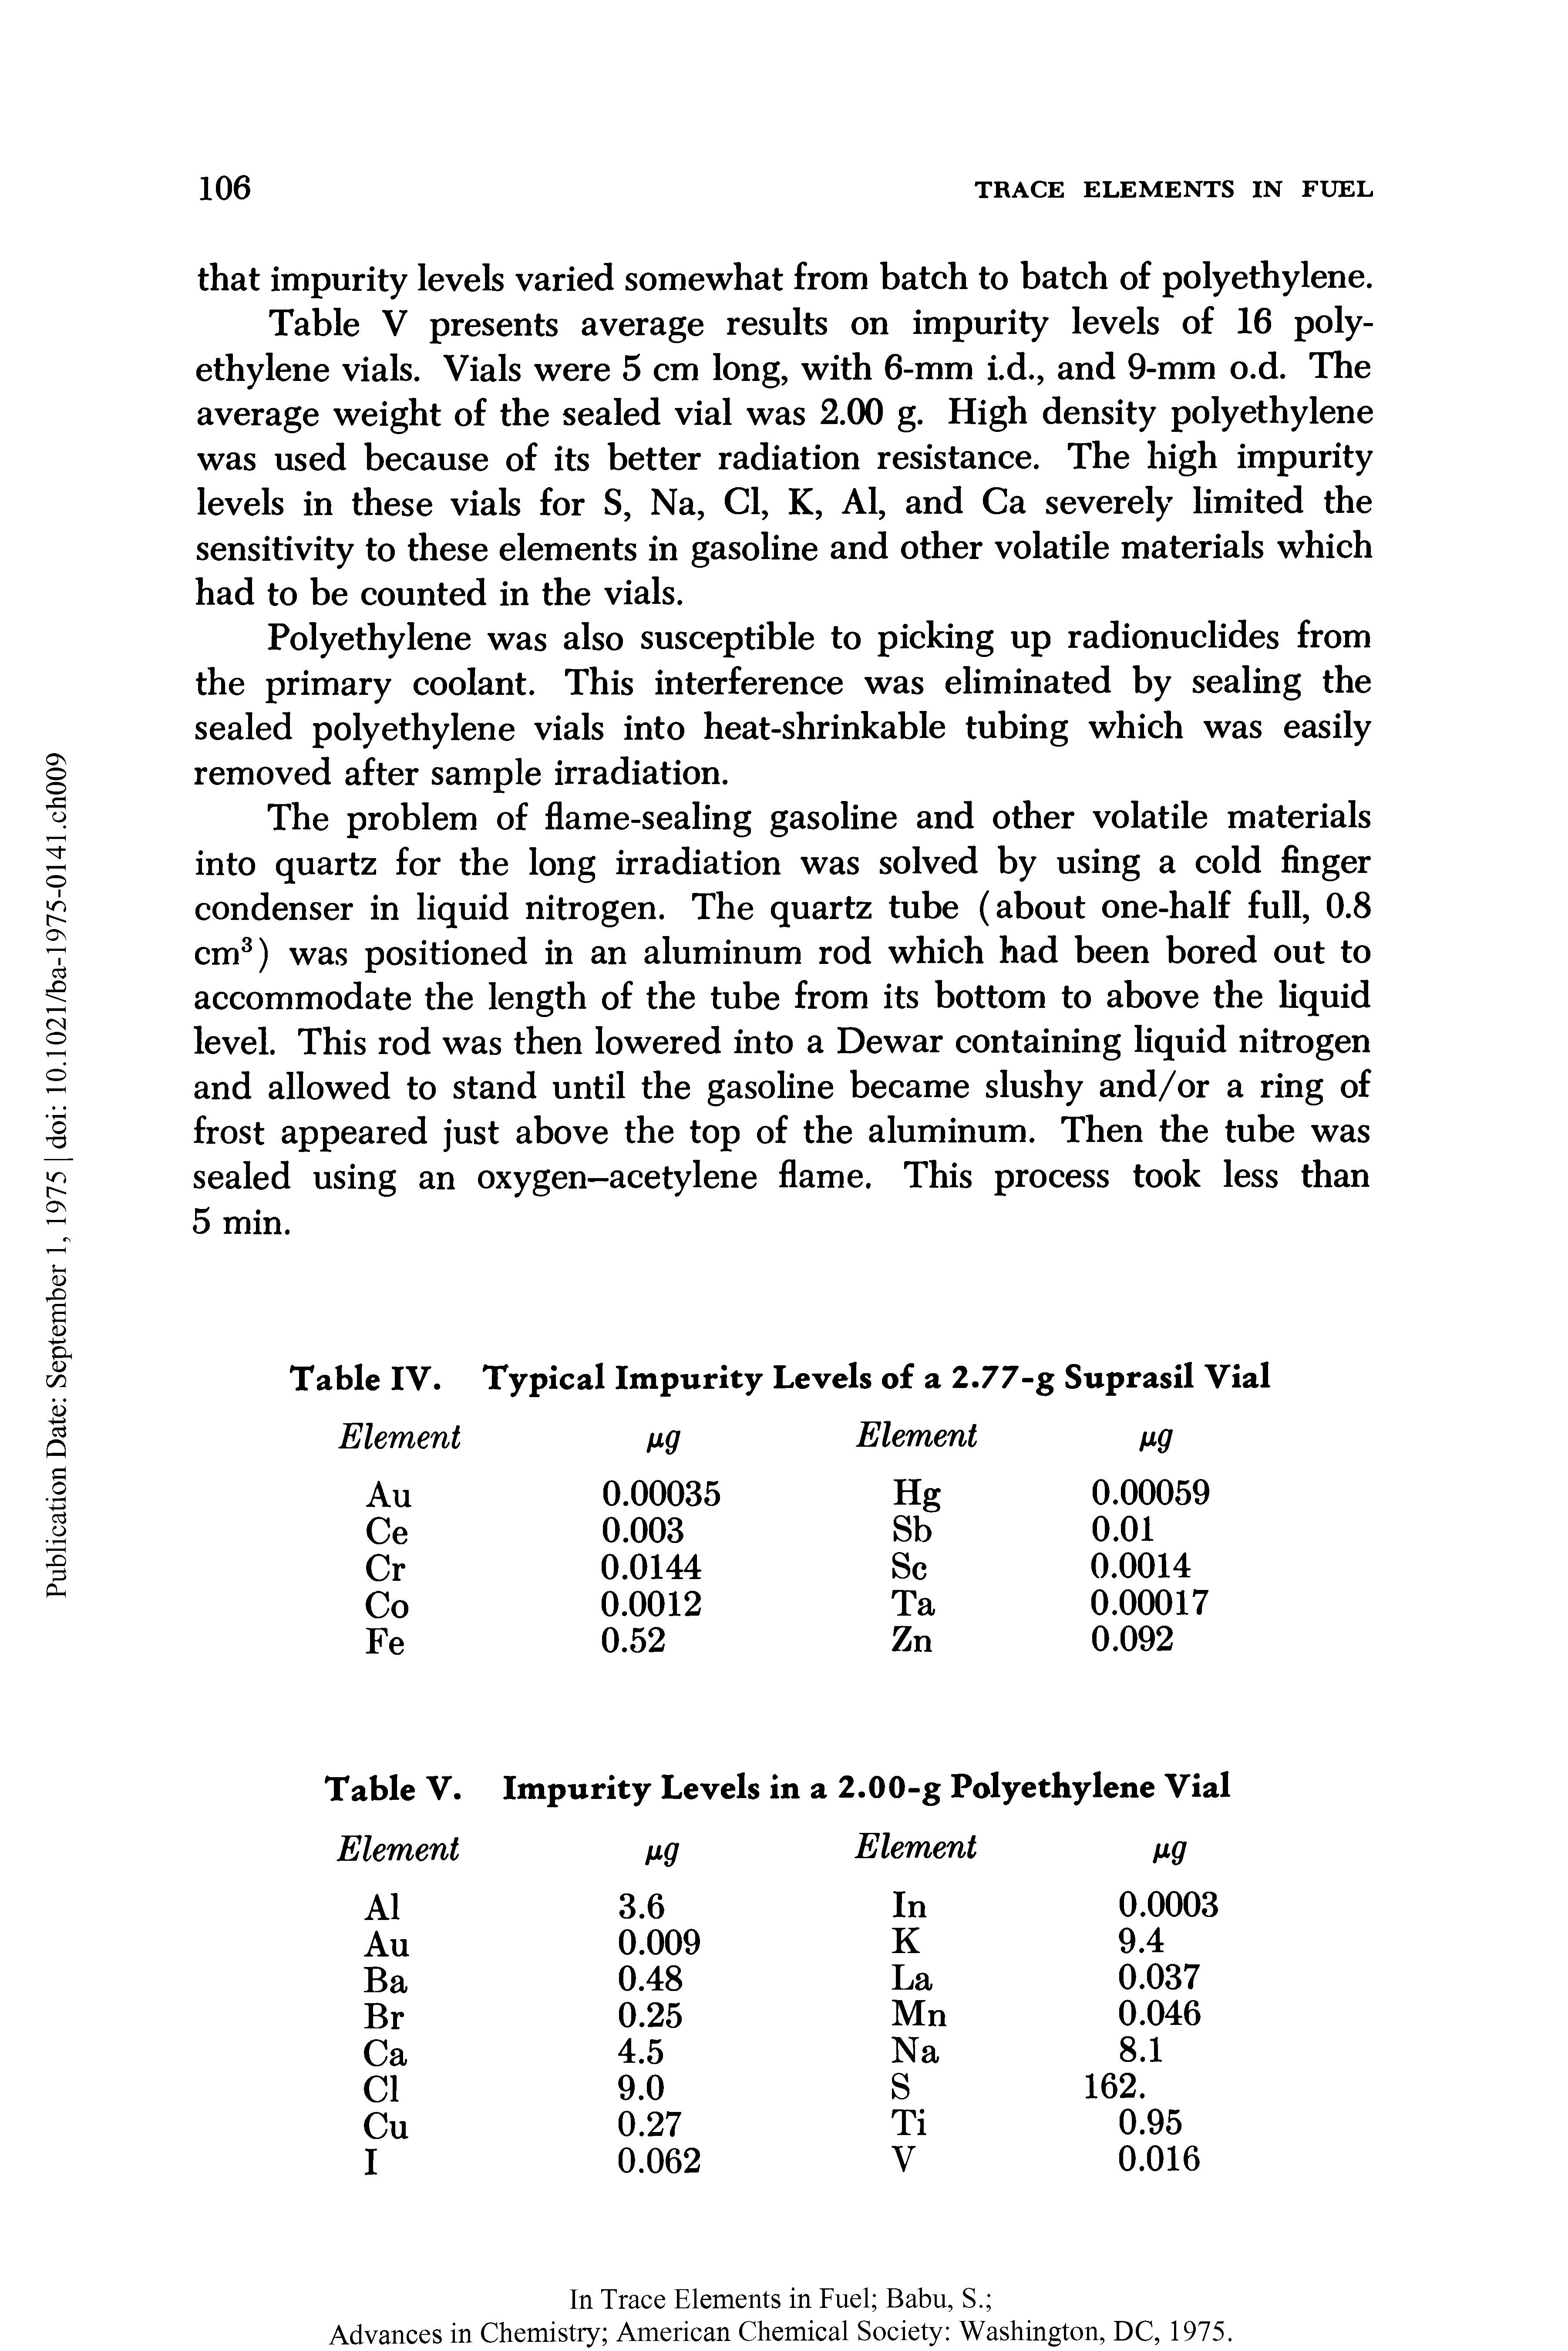 Table V presents average results on impurity levels of 16 polyethylene vials. Vials were 5 cm long, with 6-mm i.d., and 9-mm o.d. The average weight of the sealed vial was 2.00 g. High density polyethylene was used because of its better radiation resistance. The high impurity levels in these vials for S, Na, Cl, K, Al, and Ca severely limited the sensitivity to these elements in gasoline and other volatile materials which had to be counted in the vials.